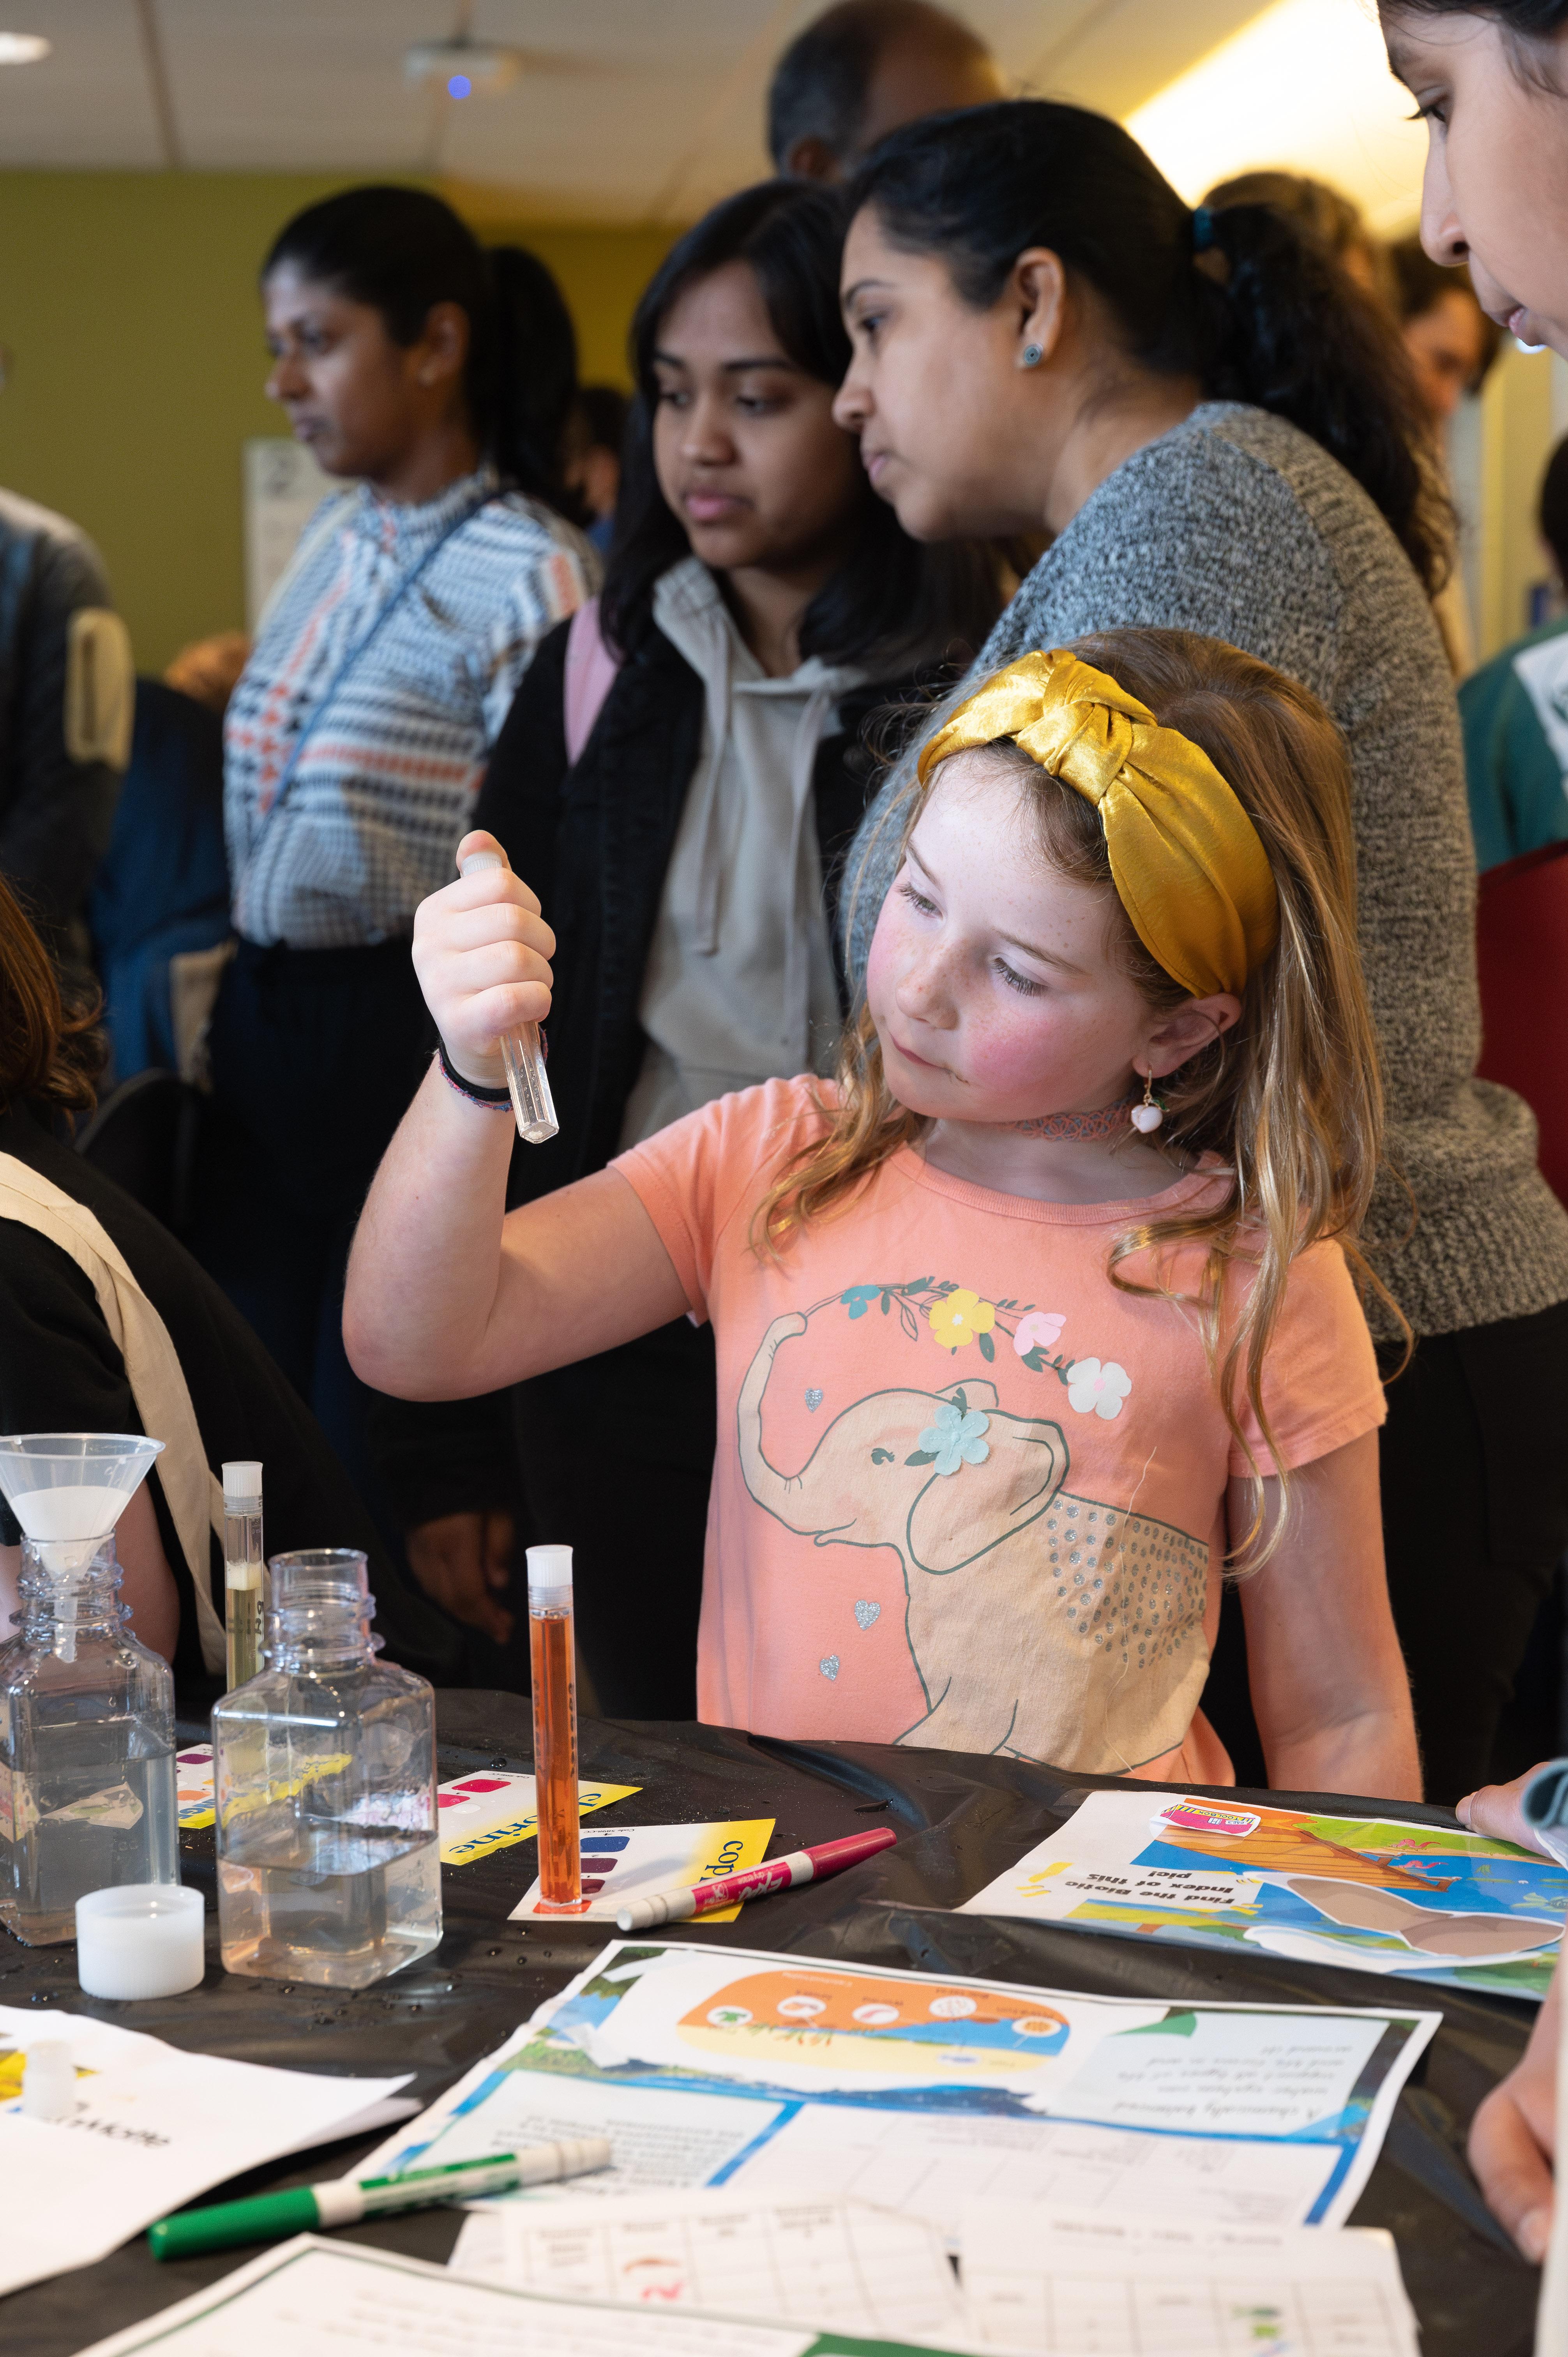 Little girl in yellow headband examines a test tube. 